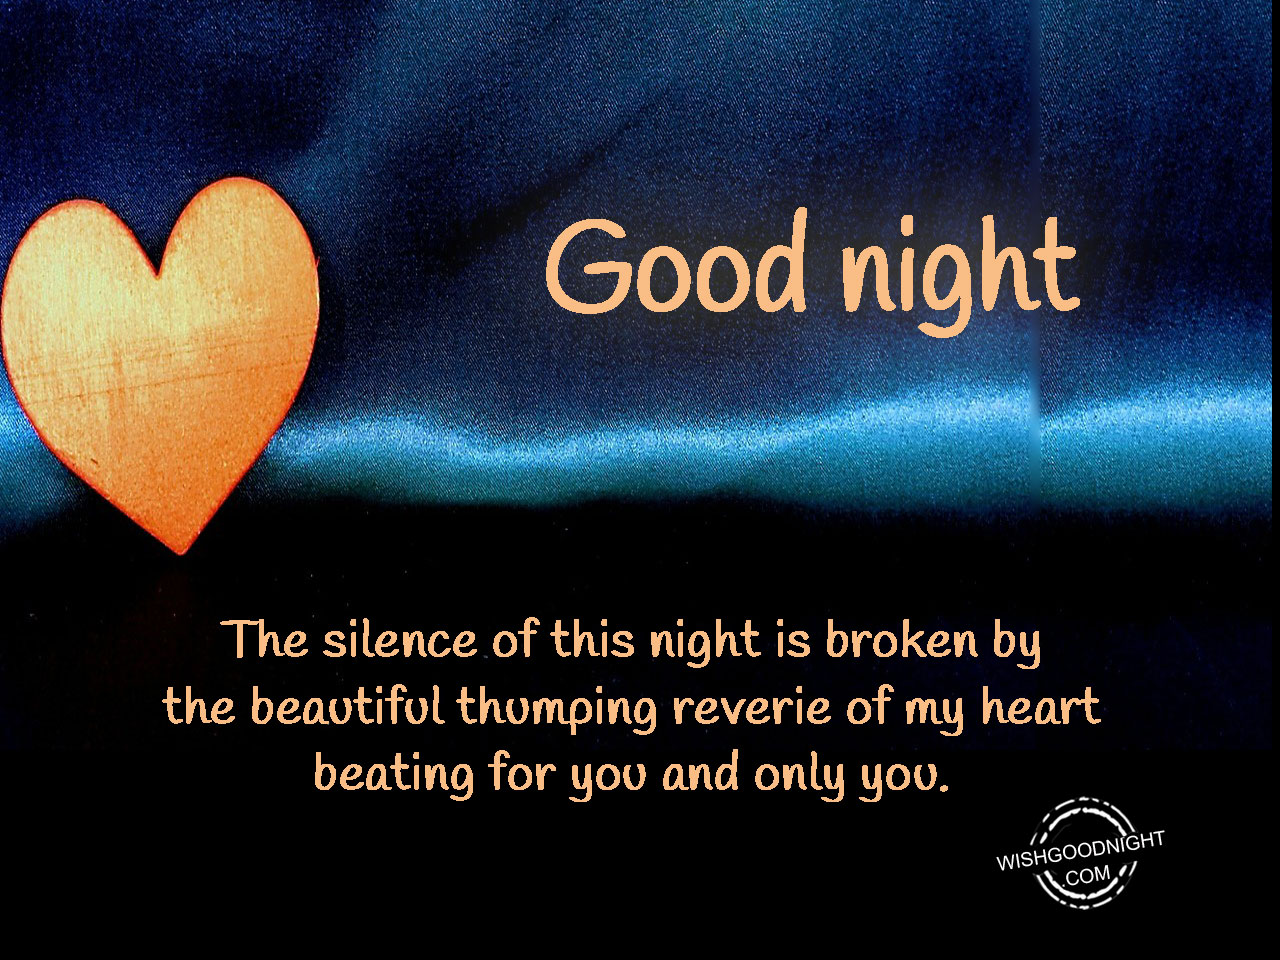 good night images, quotes, and wishes for a peaceful night's sleep to ...